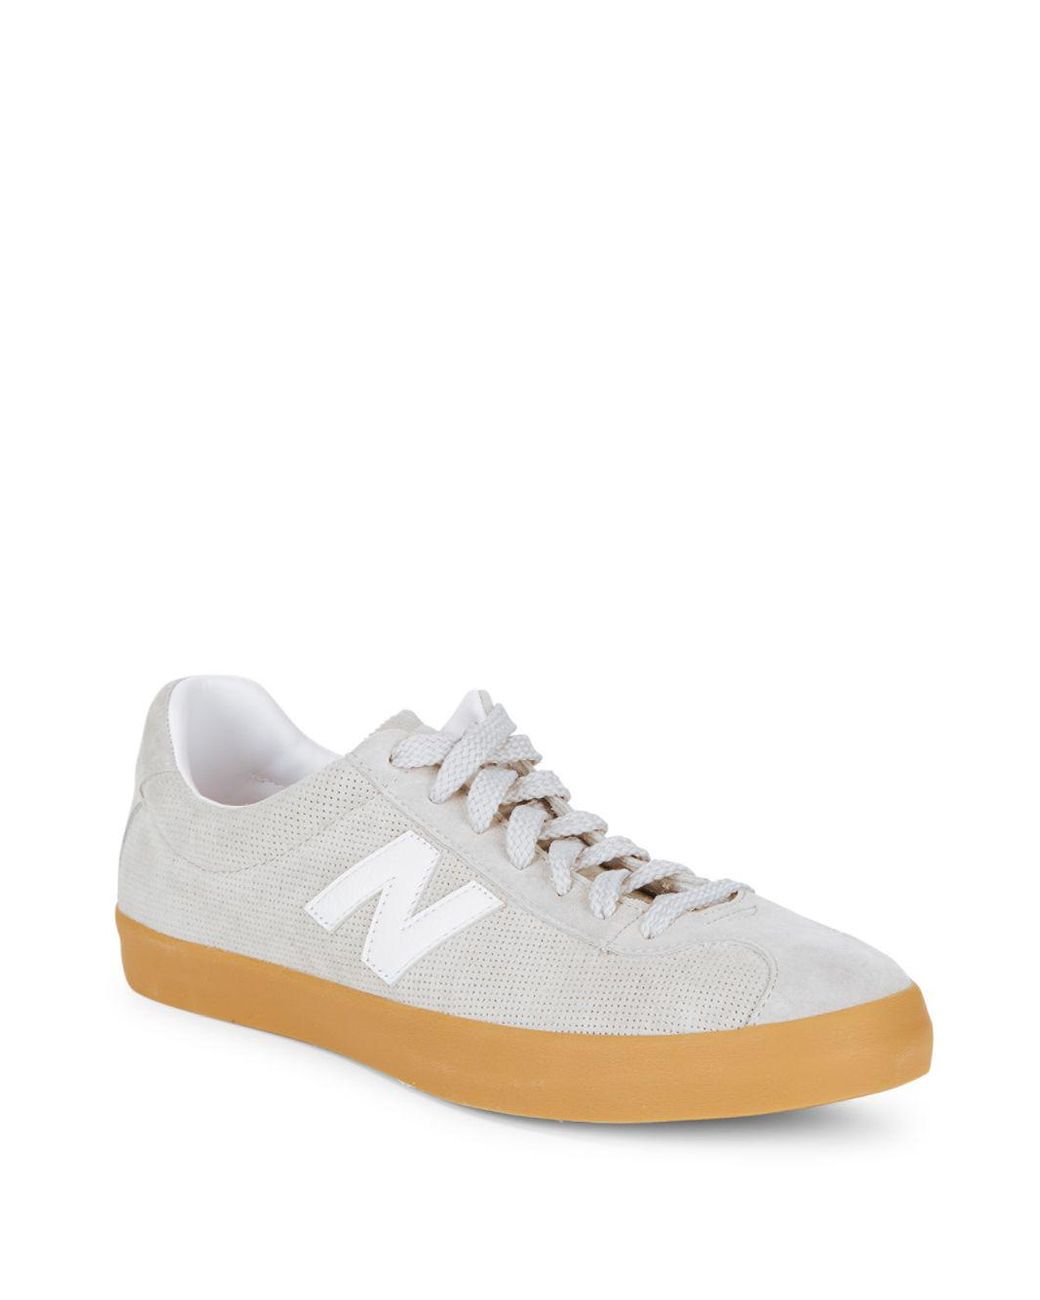 New Balance Tempus Suede Gum Sole Sneakers in Grey (Gray) | Lyst